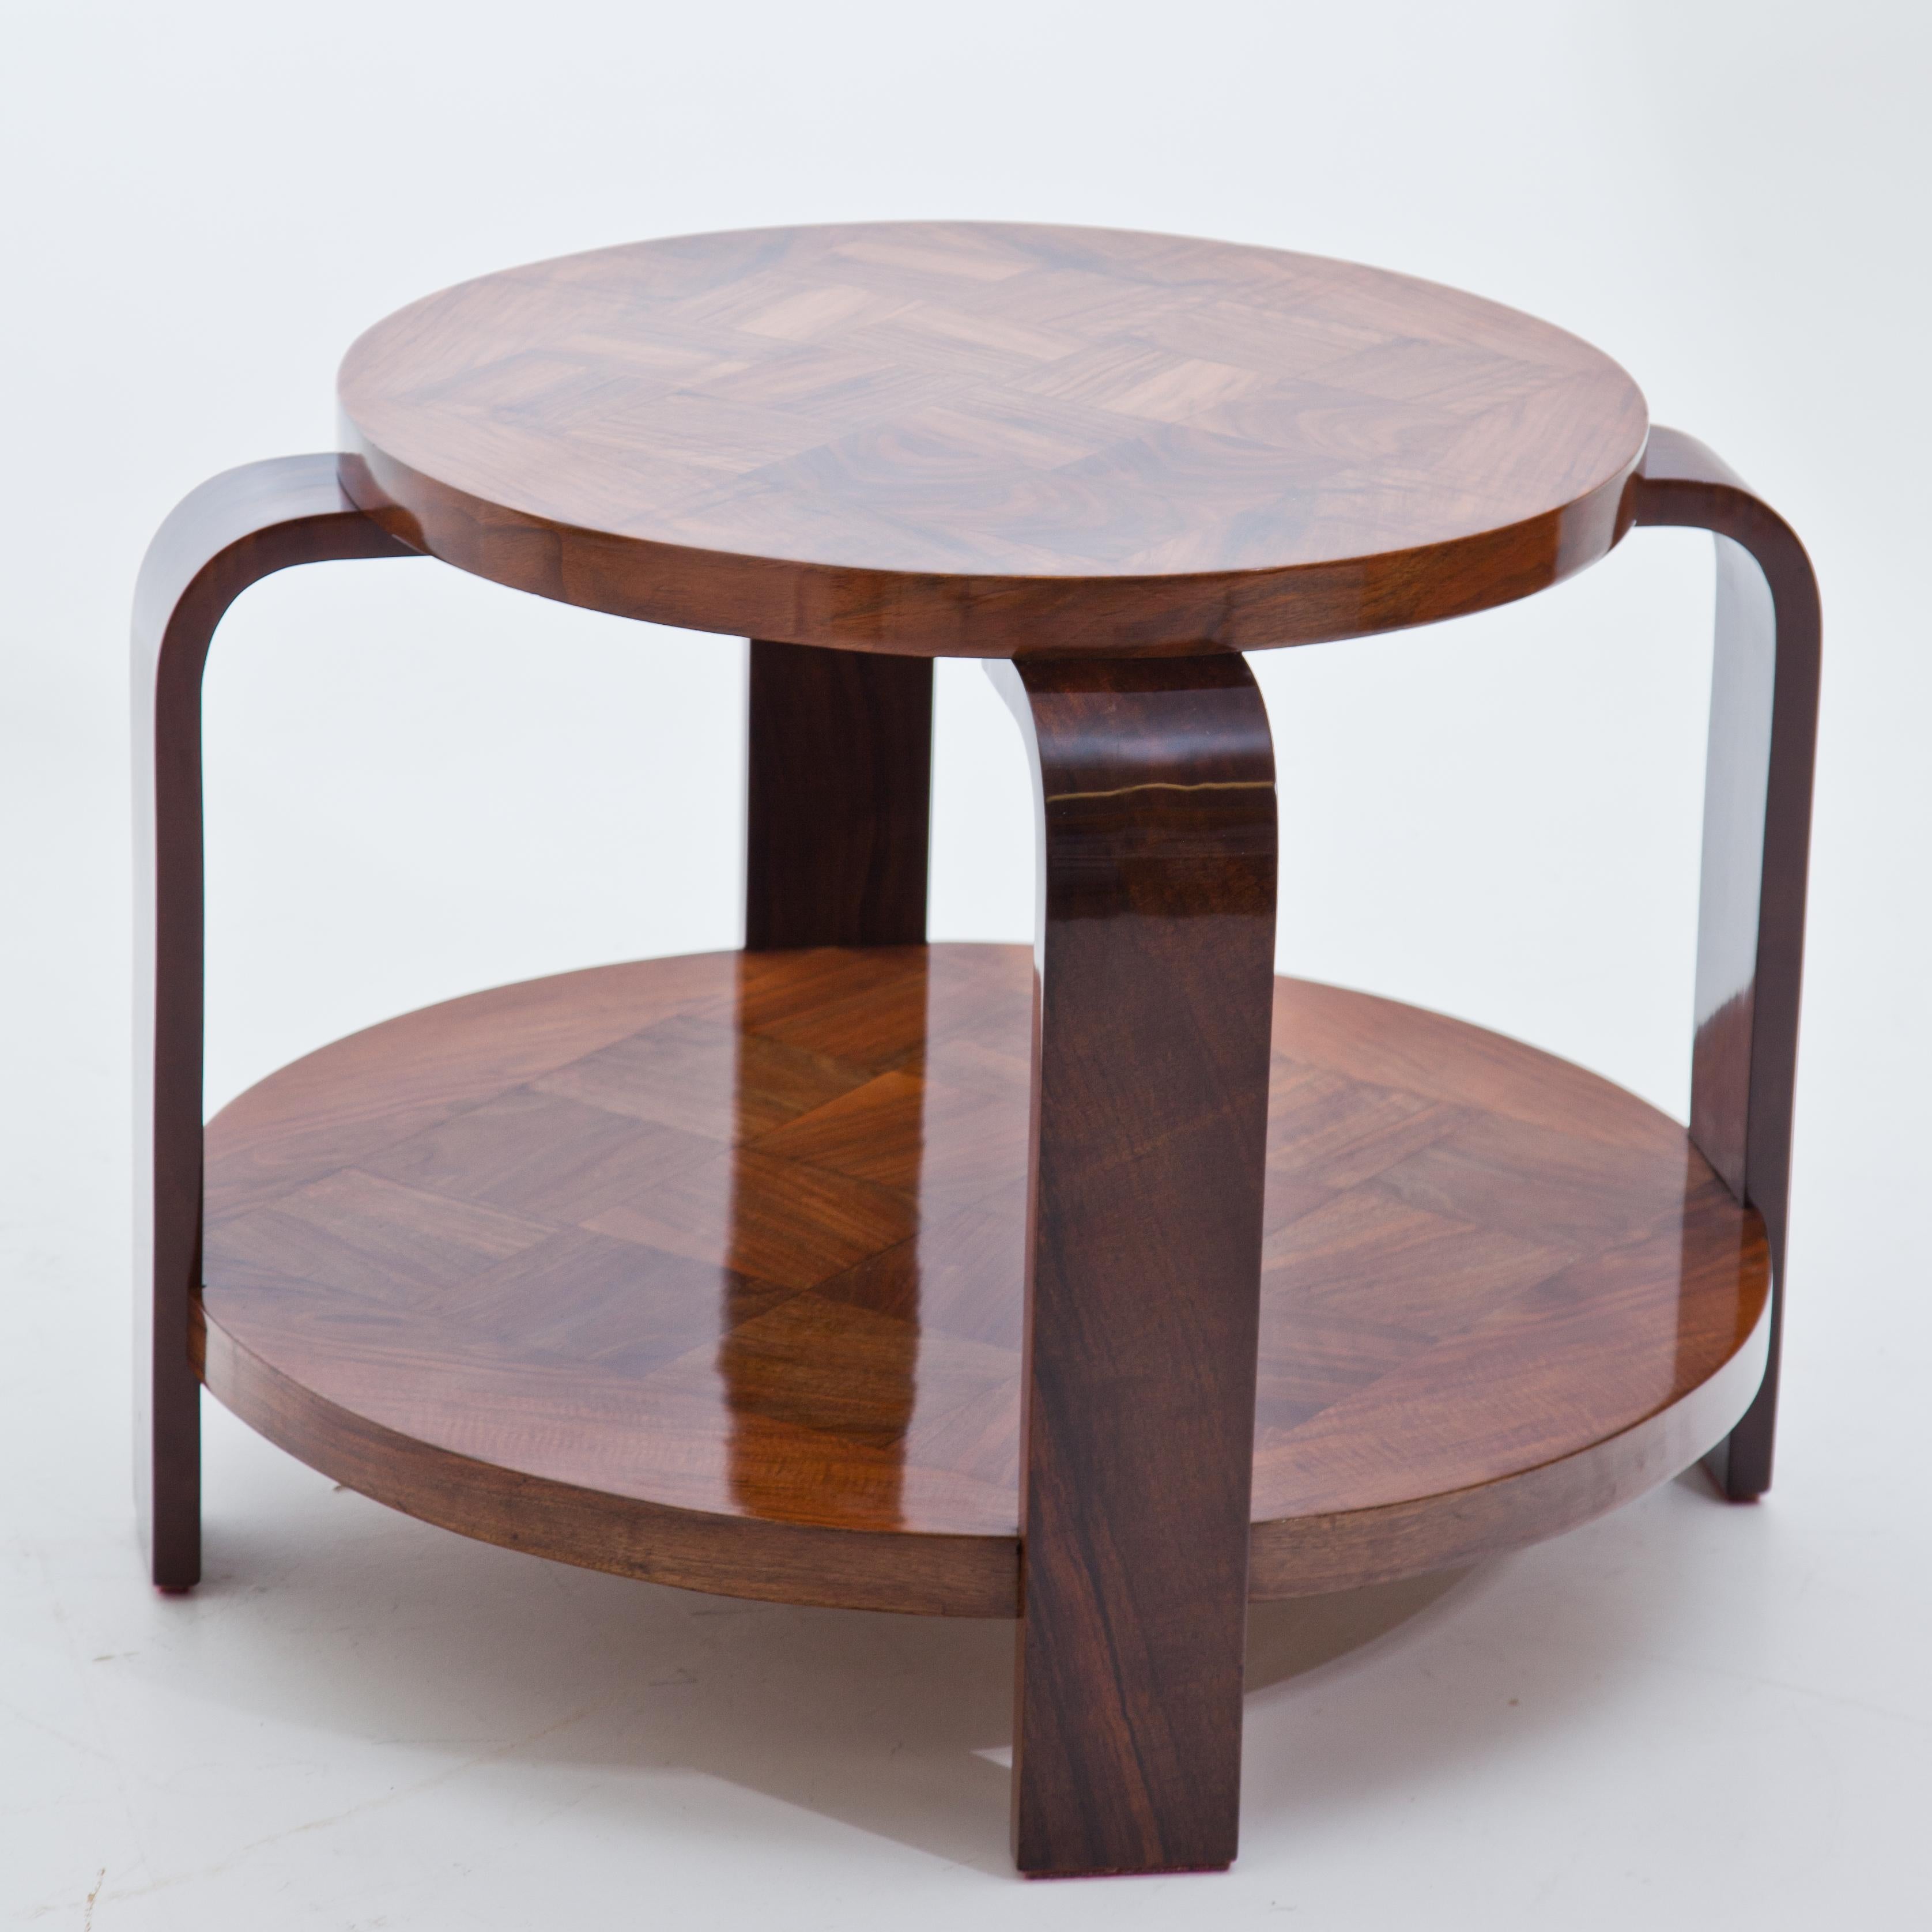 Polished Art Deco Two-Tier Side Table